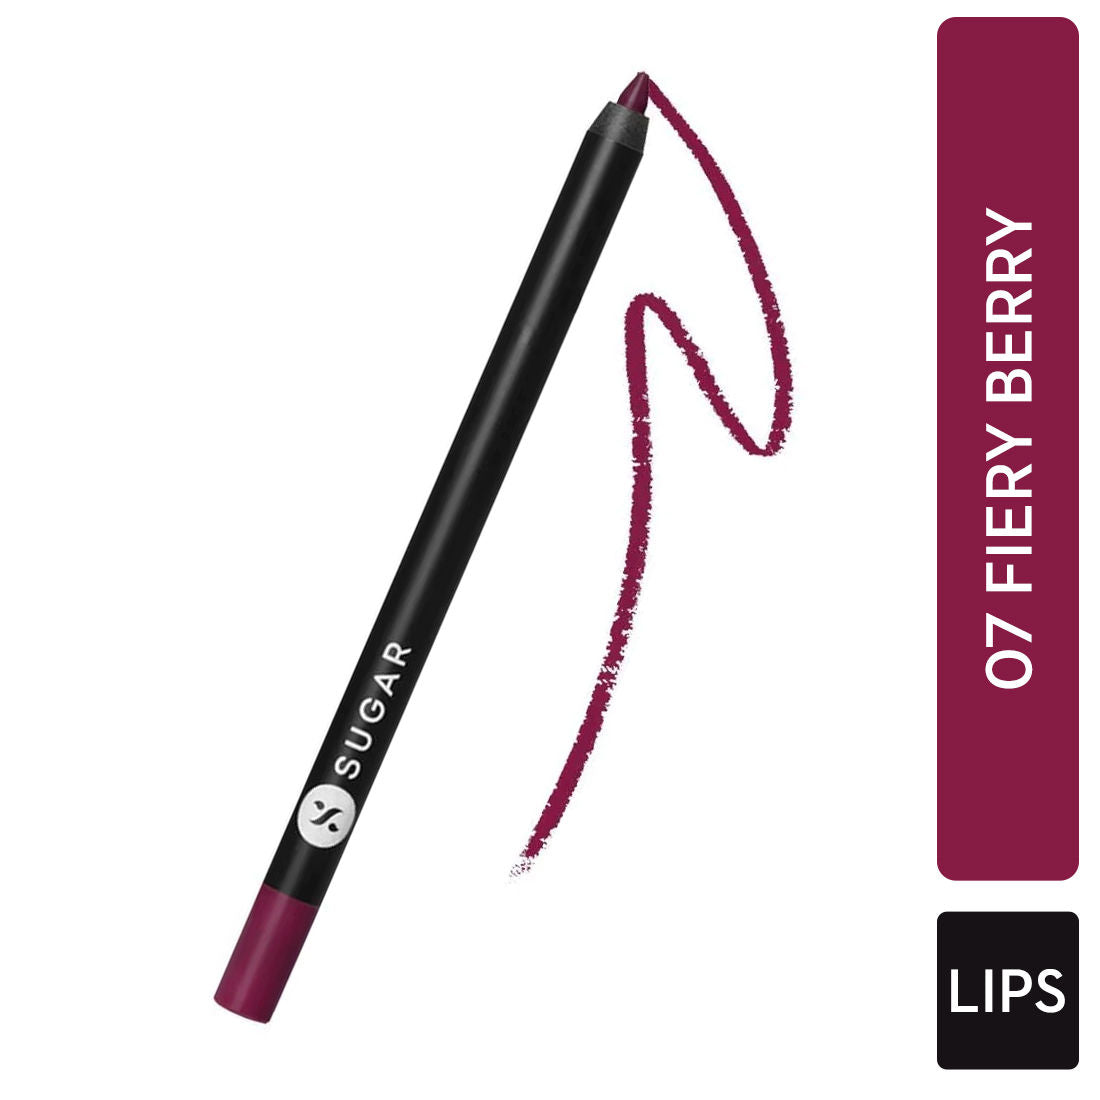 Sugar Lipping On The Edge Lip Liner With Free Sharpener - 07 Fiery Berry (1.2G)